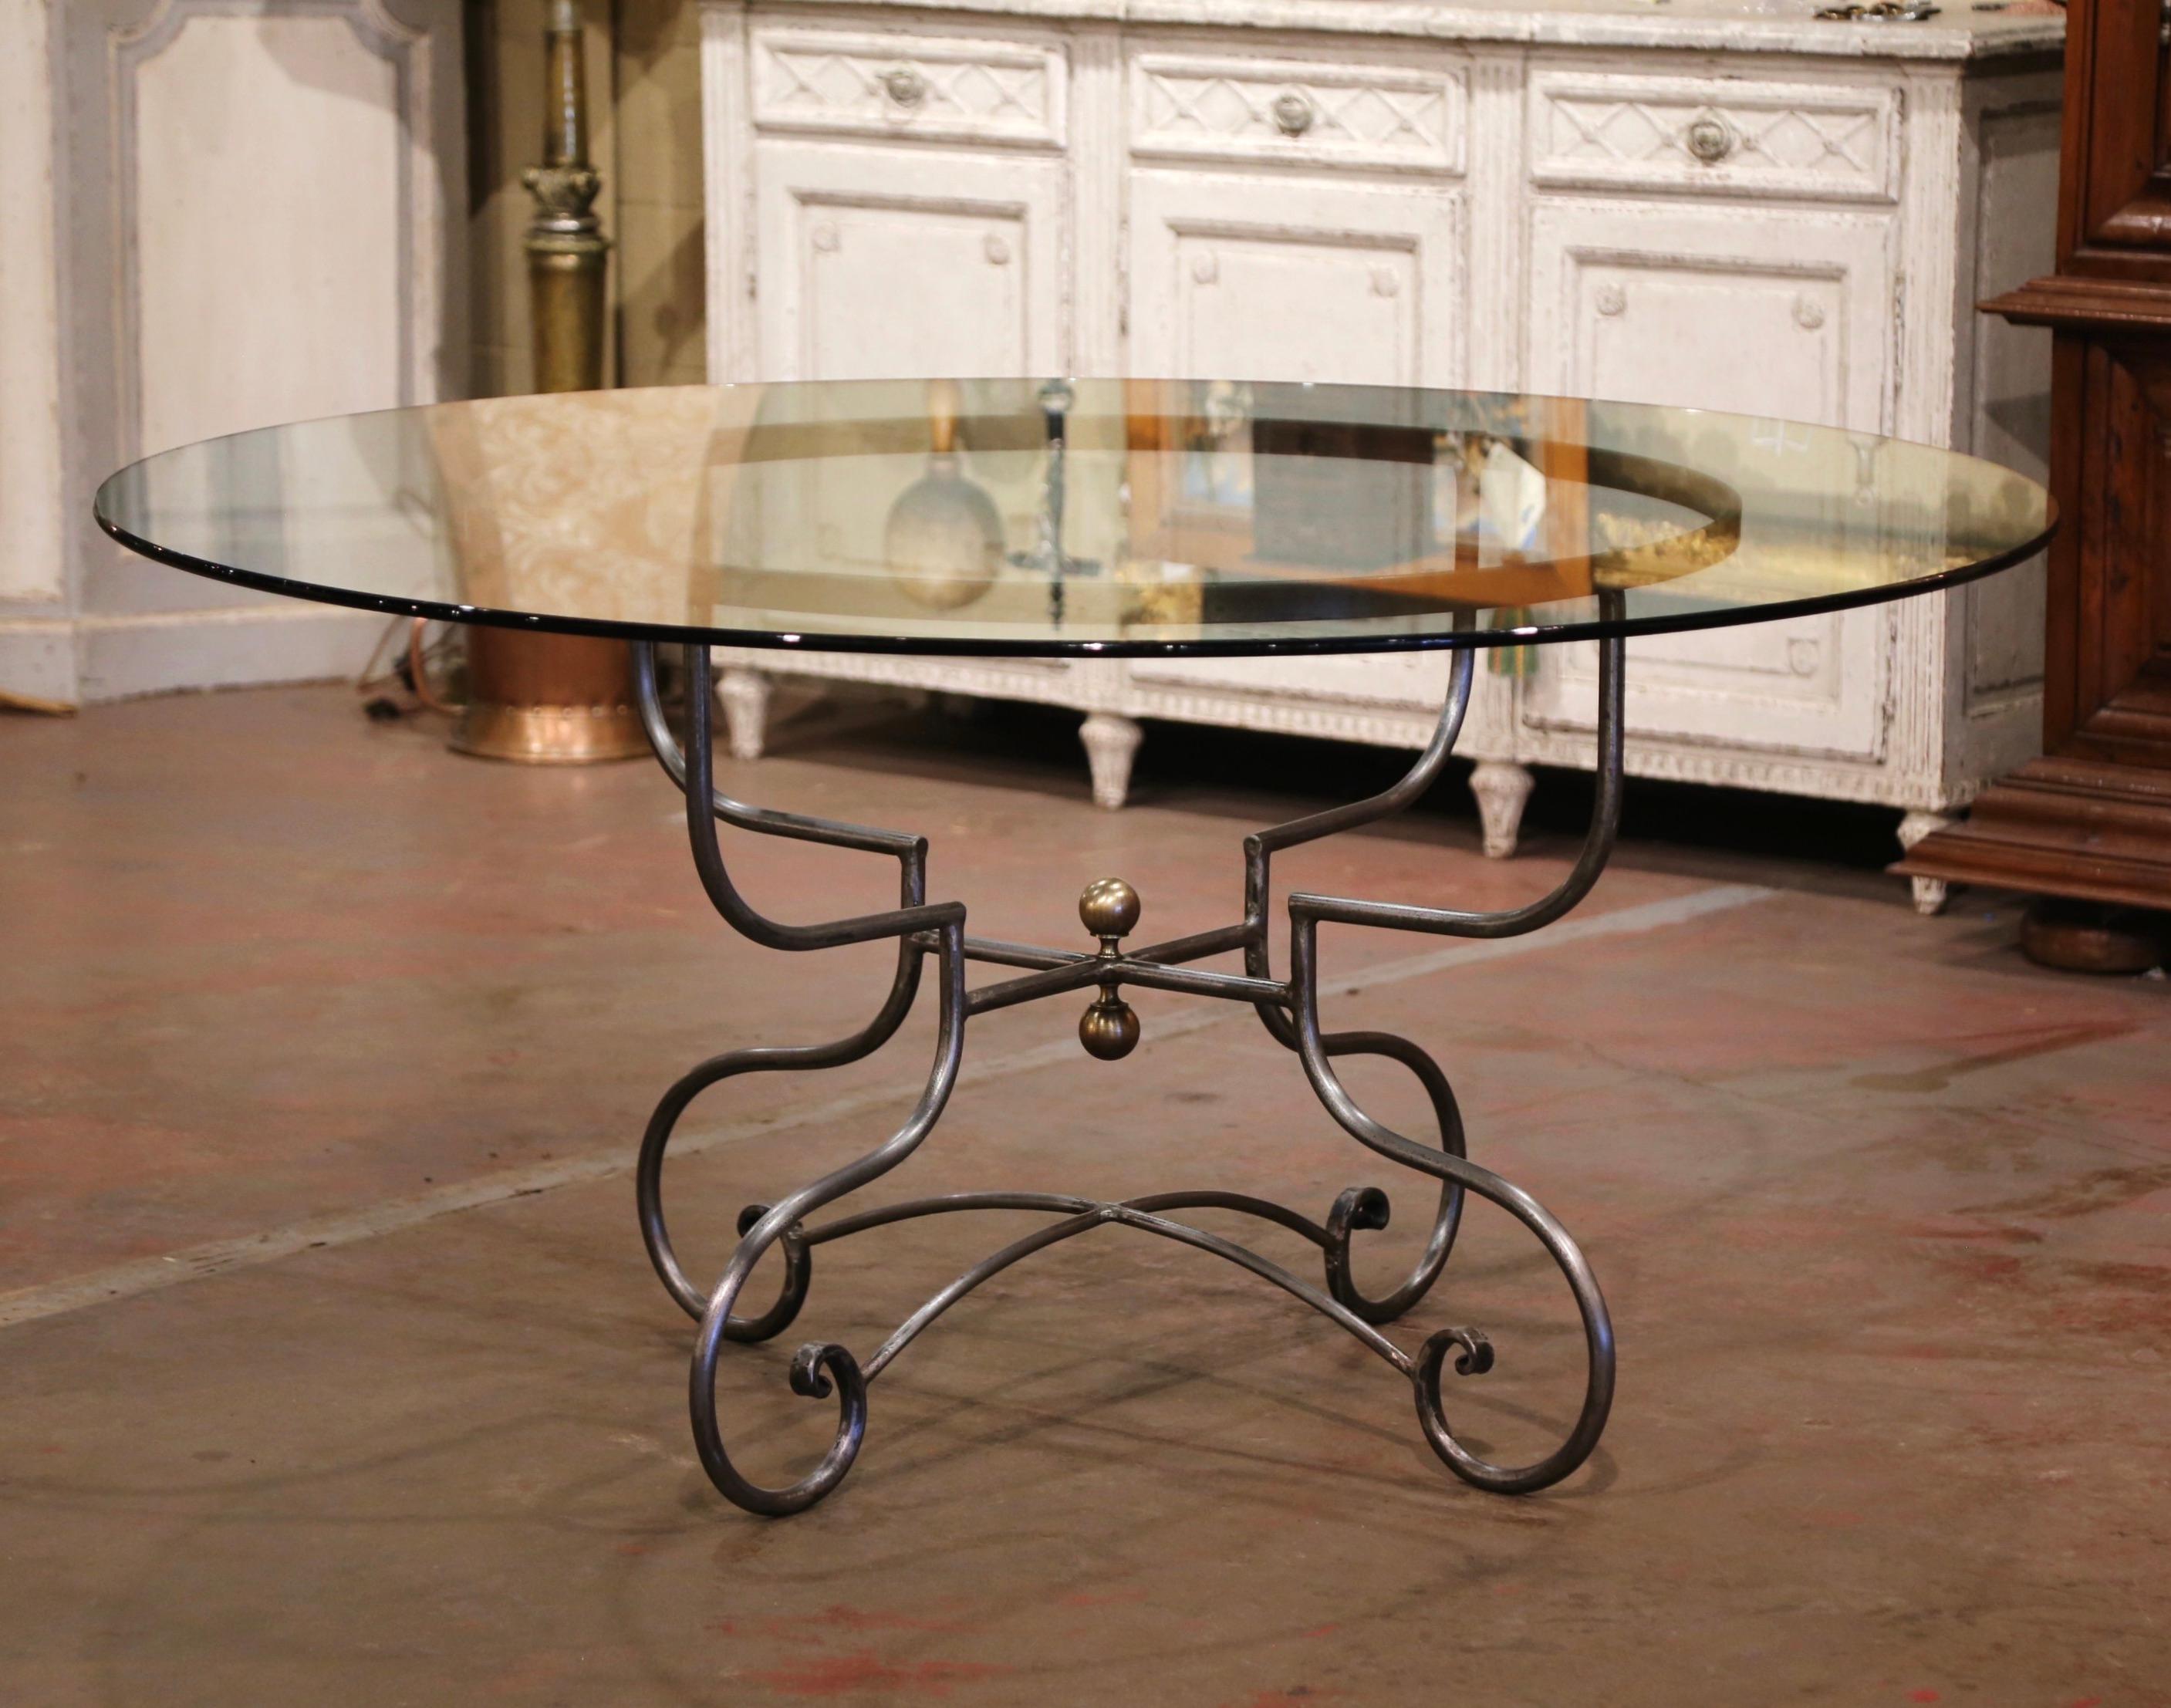 Decorate a dining or breakfast room with this elegant table. Crafted in Paris France circa 1980, the table features a wrought iron base with scrolled legs decorated with a double bottom stretcher embellished with a center brass finial. The surface